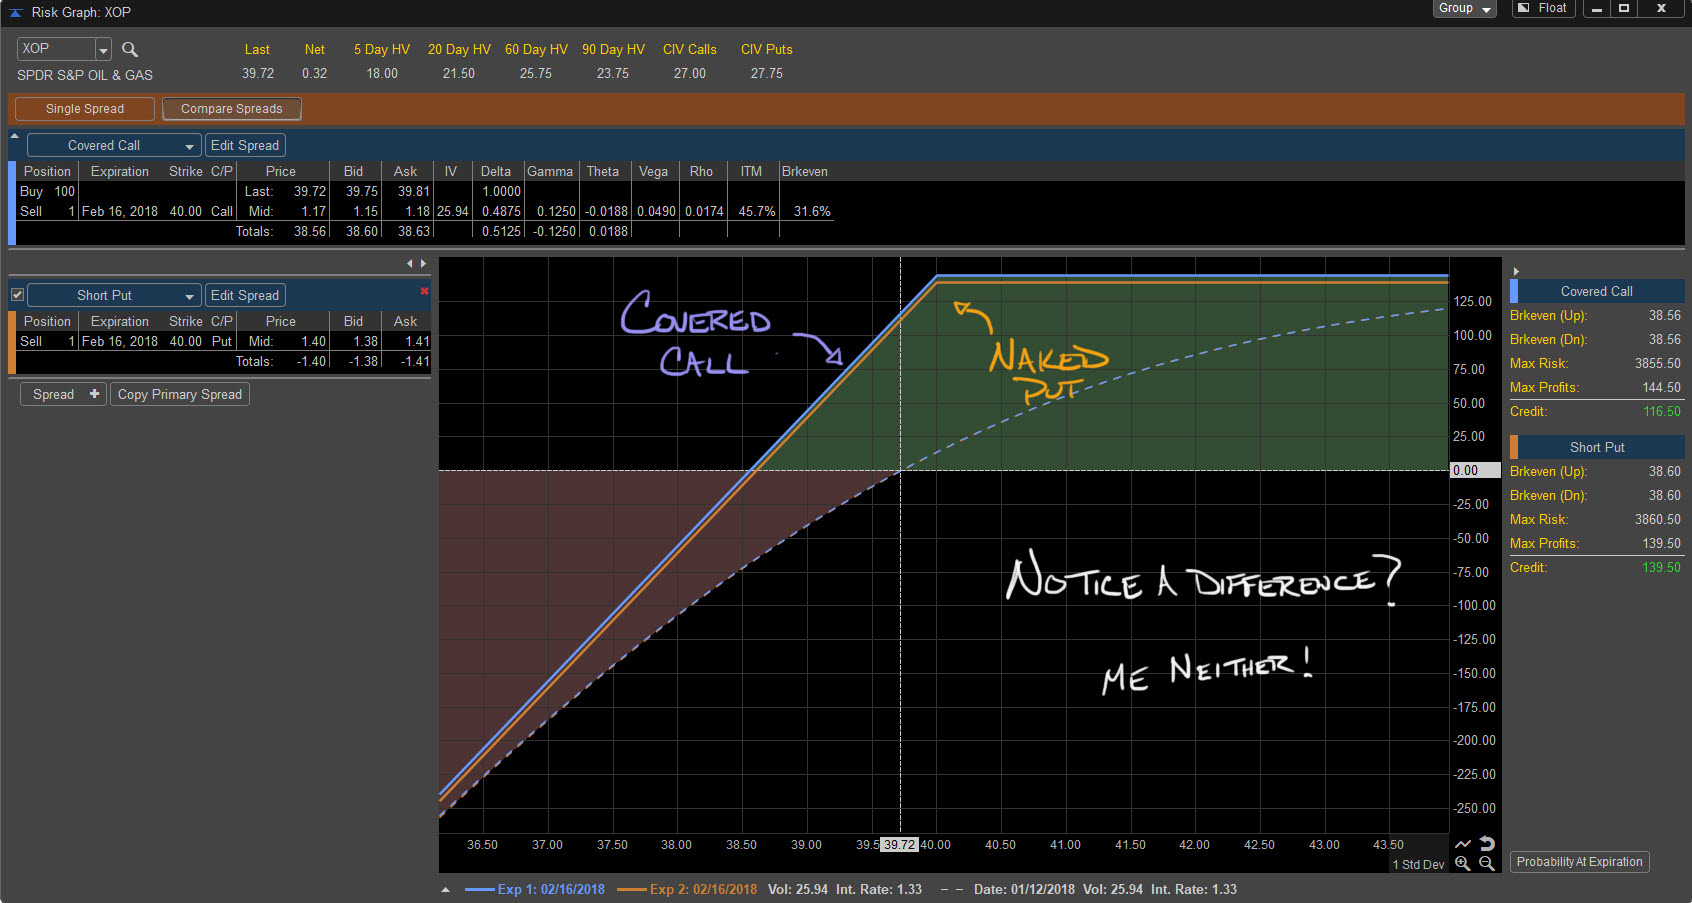 Covered Call & Naked Put risk graph.